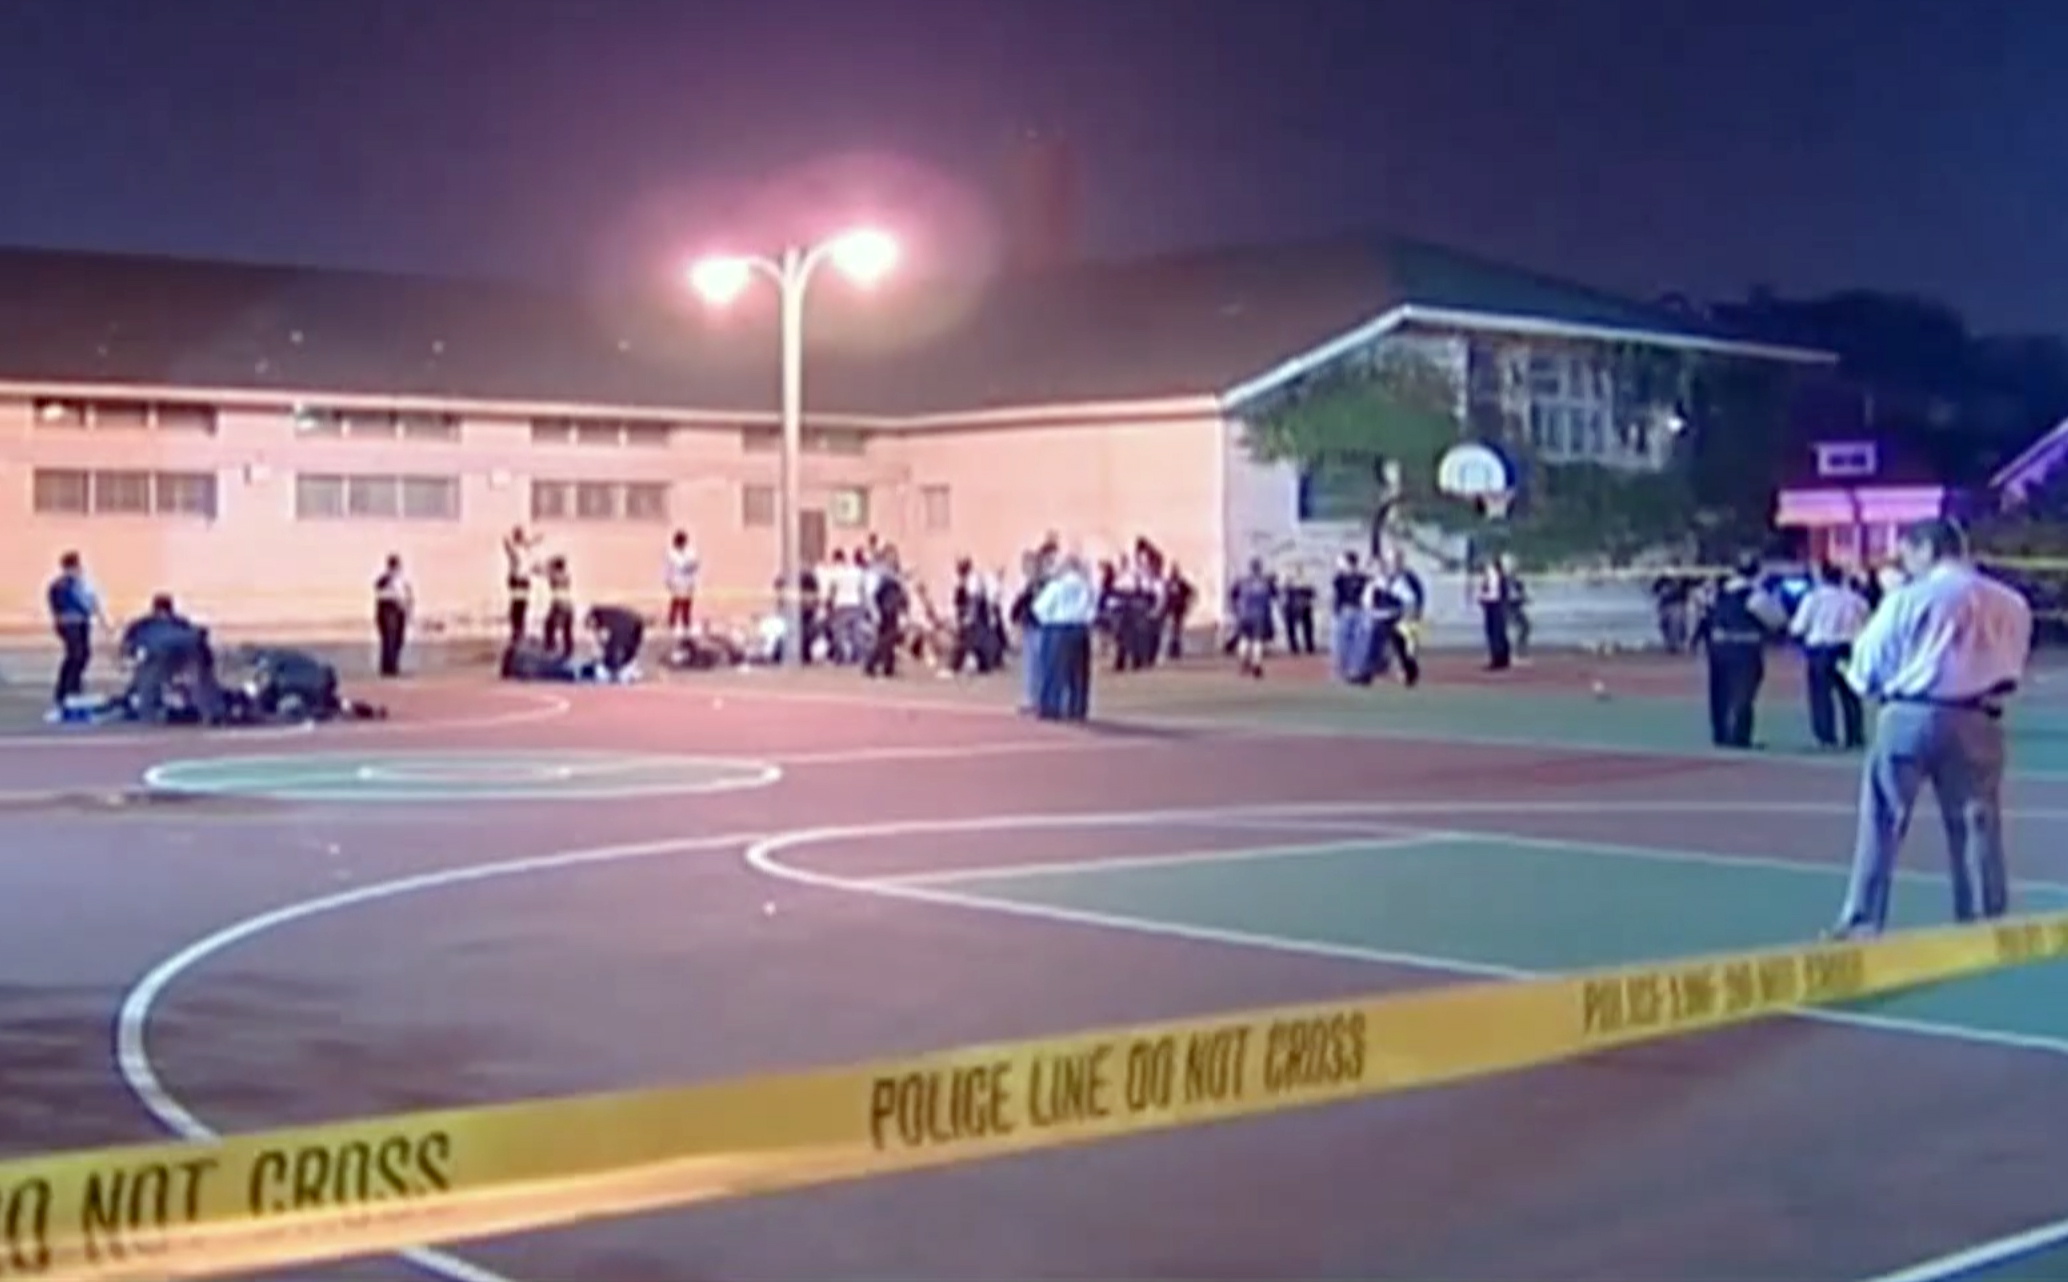 This still frame made from a video provided by Ken Herzlich shows the scene where a number of people, including a 3-year-old child, were shot Thursday night in a city park in Chicago.